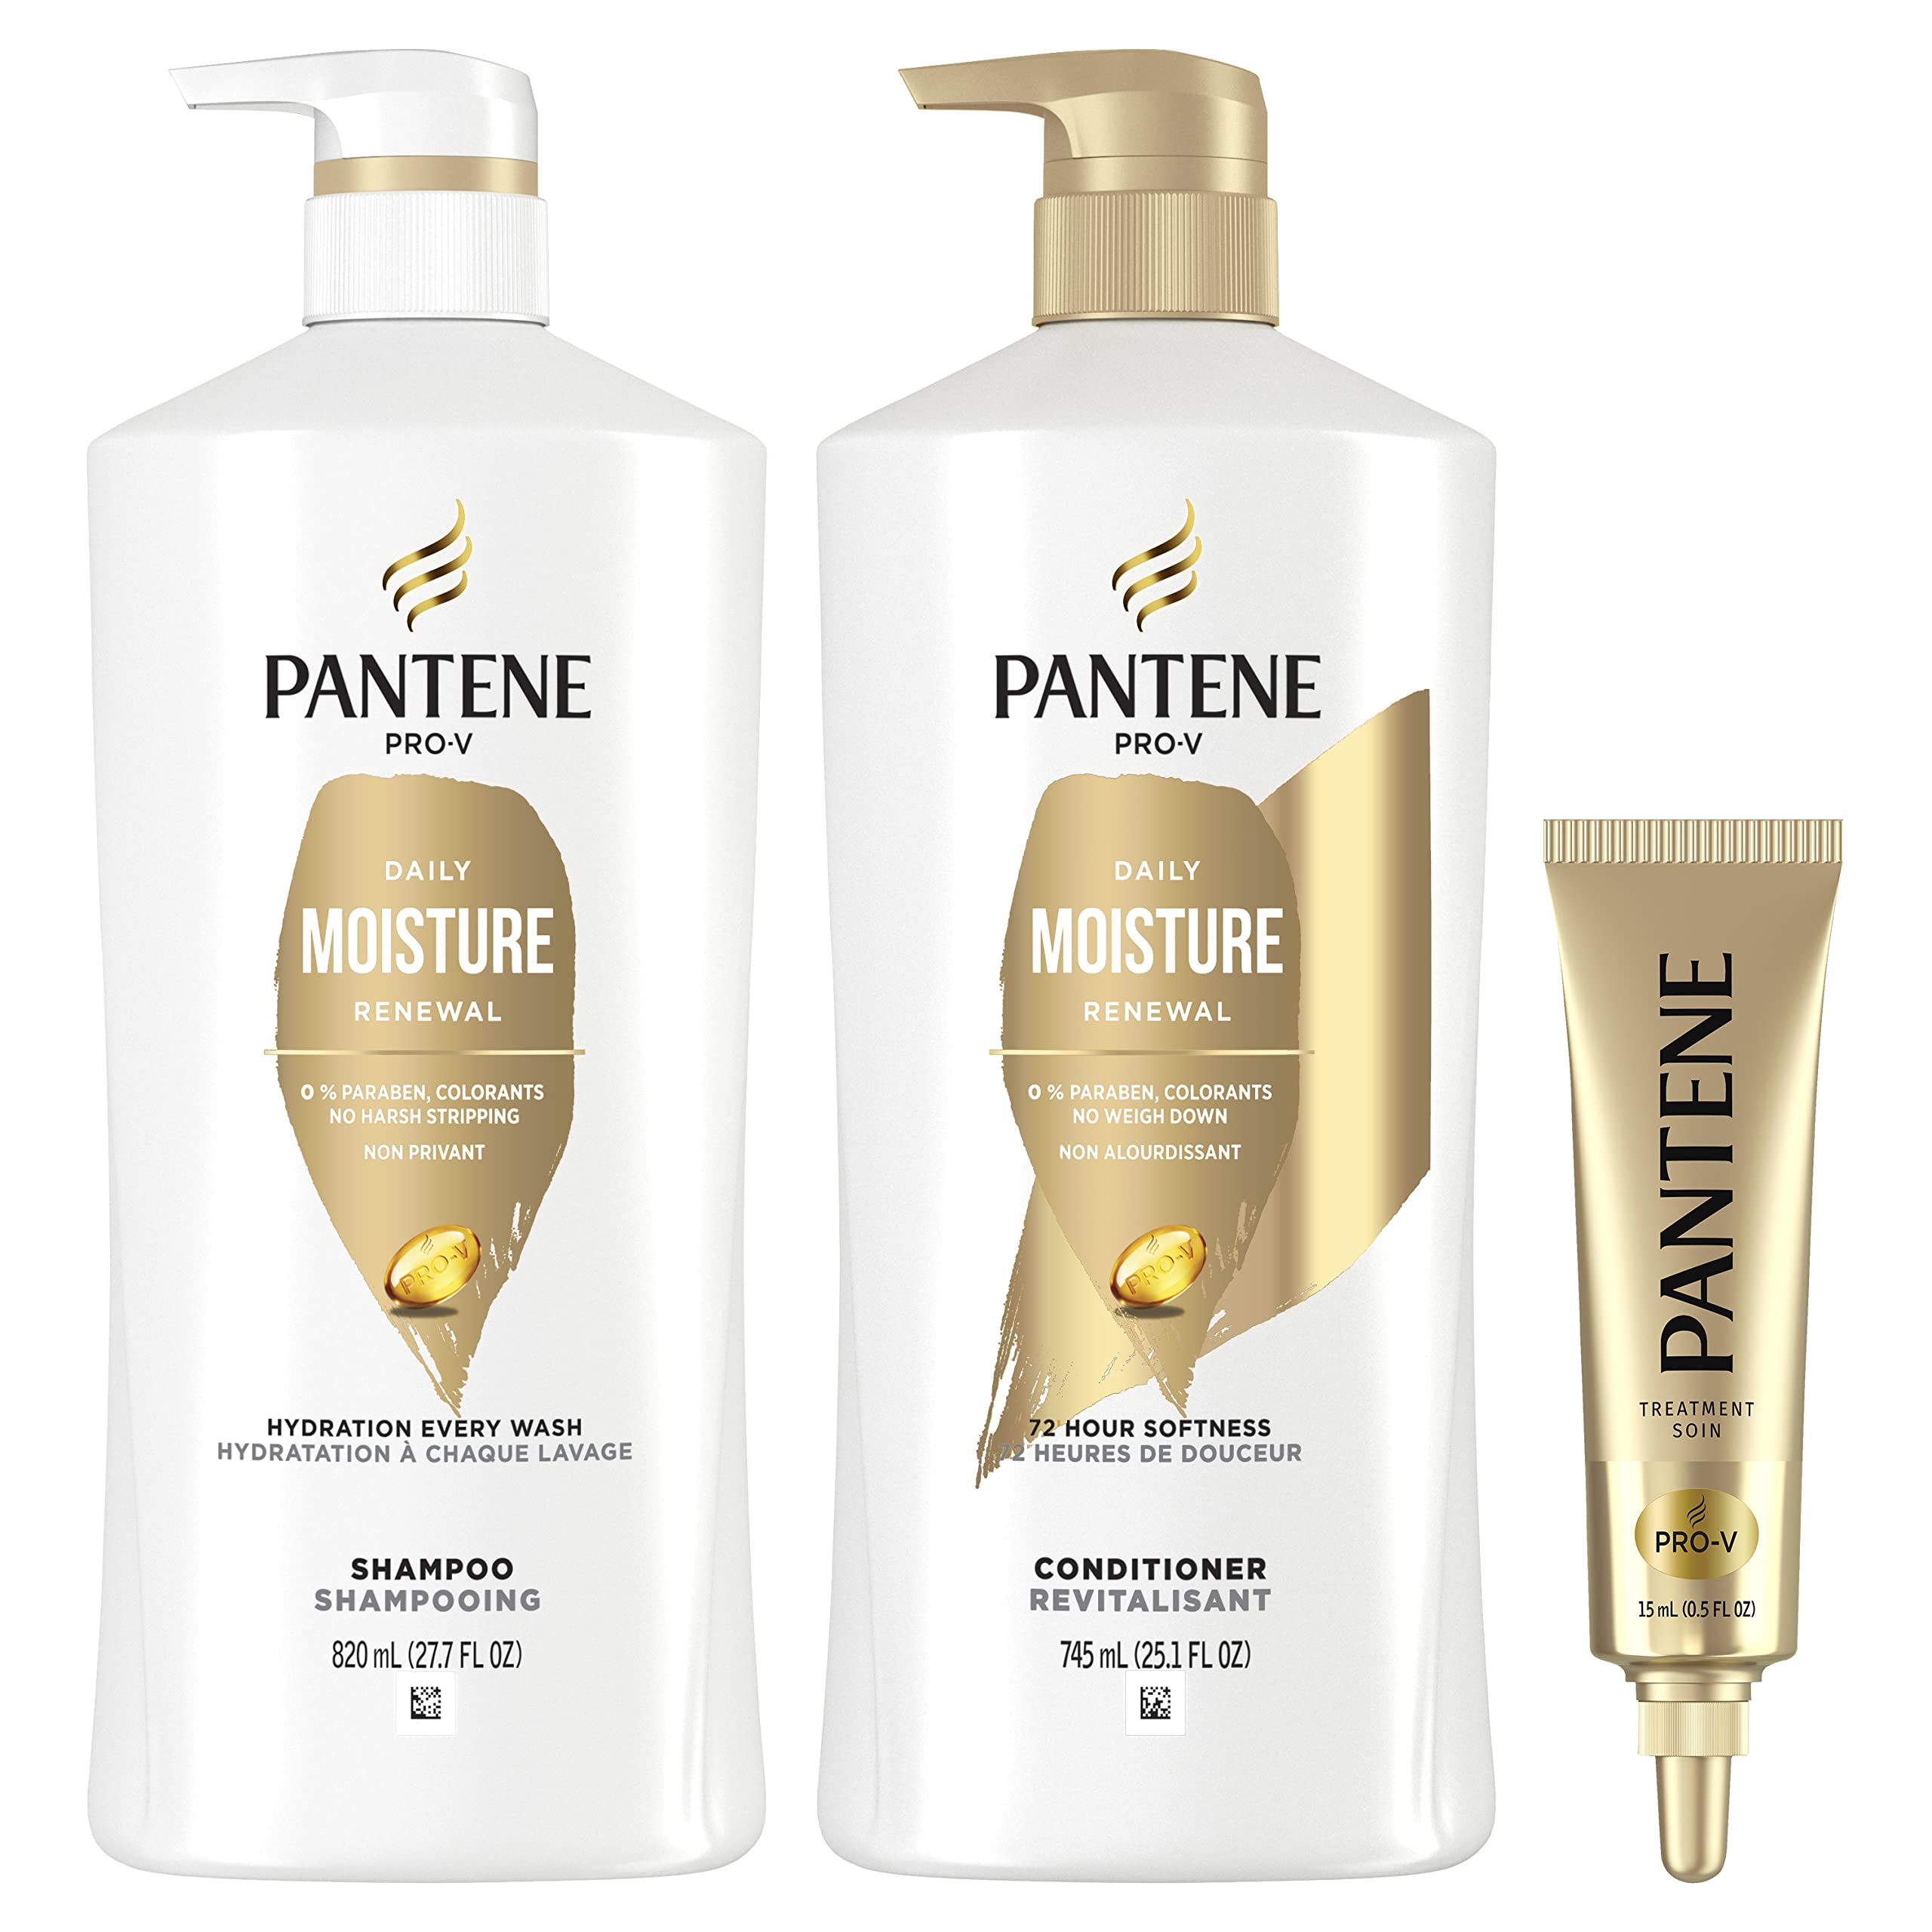 Pantene Shampoo Conditioner And Hair Treatment Set Daily Moisture Renewal For Dry Hair Safe 